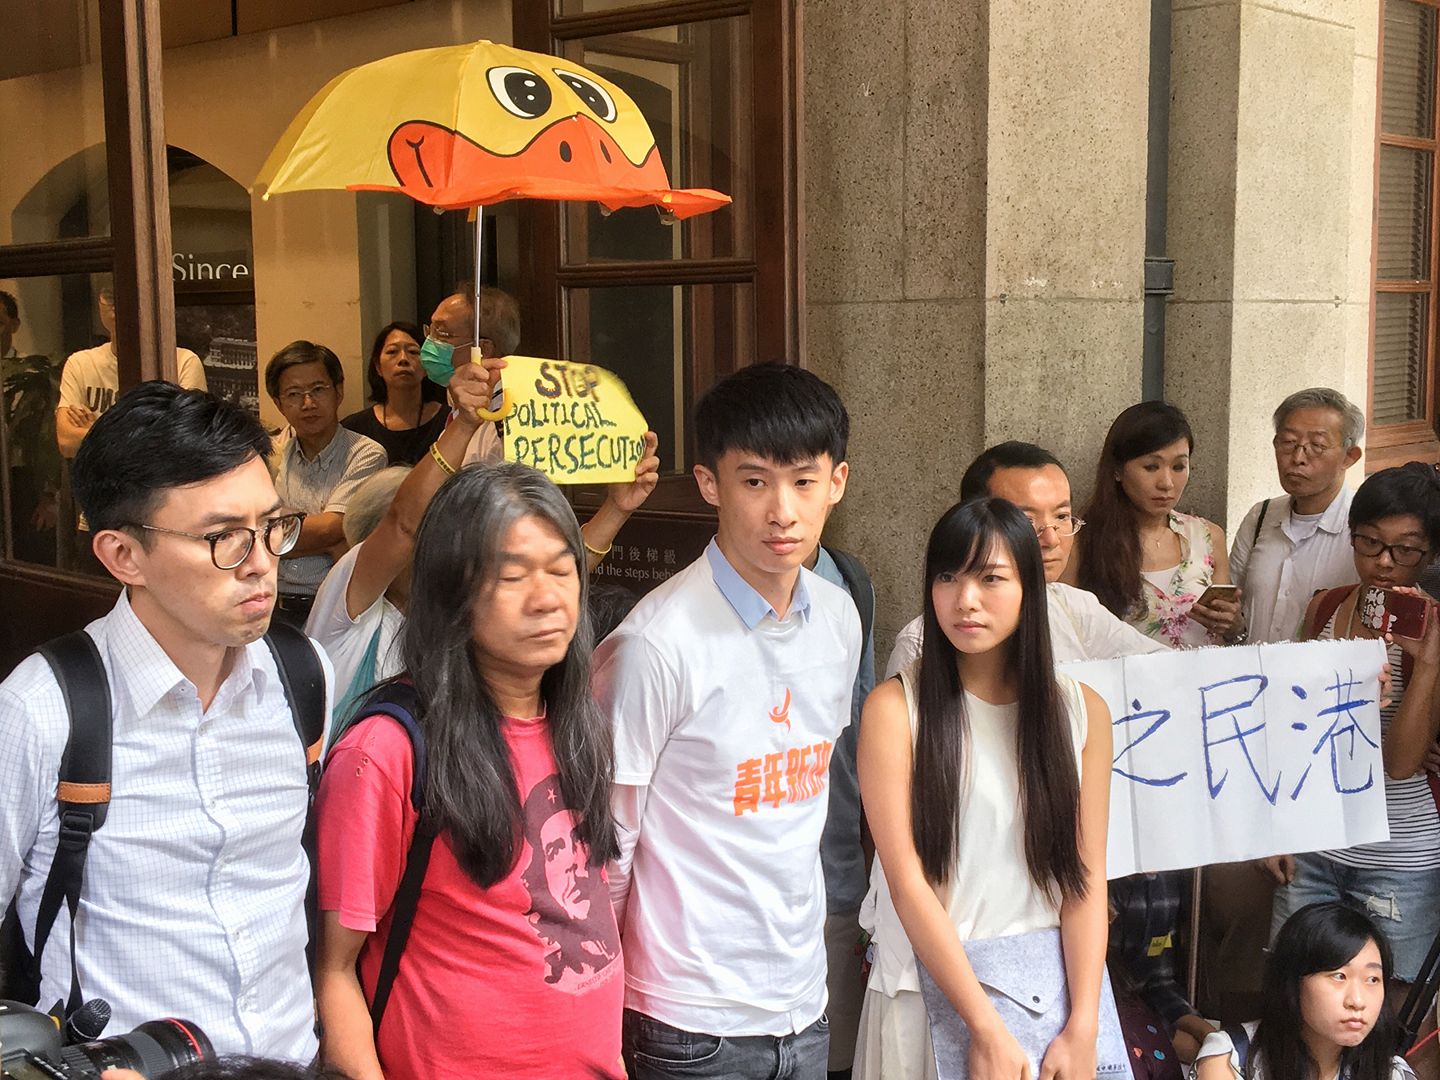 Members of the public and fellow pro-democracy camp members showed support for ousted legislators Baggio Leung and Yau Wai-ching at the Court of Final Appeal on Friday. Photo: Youngspiration / Facebook